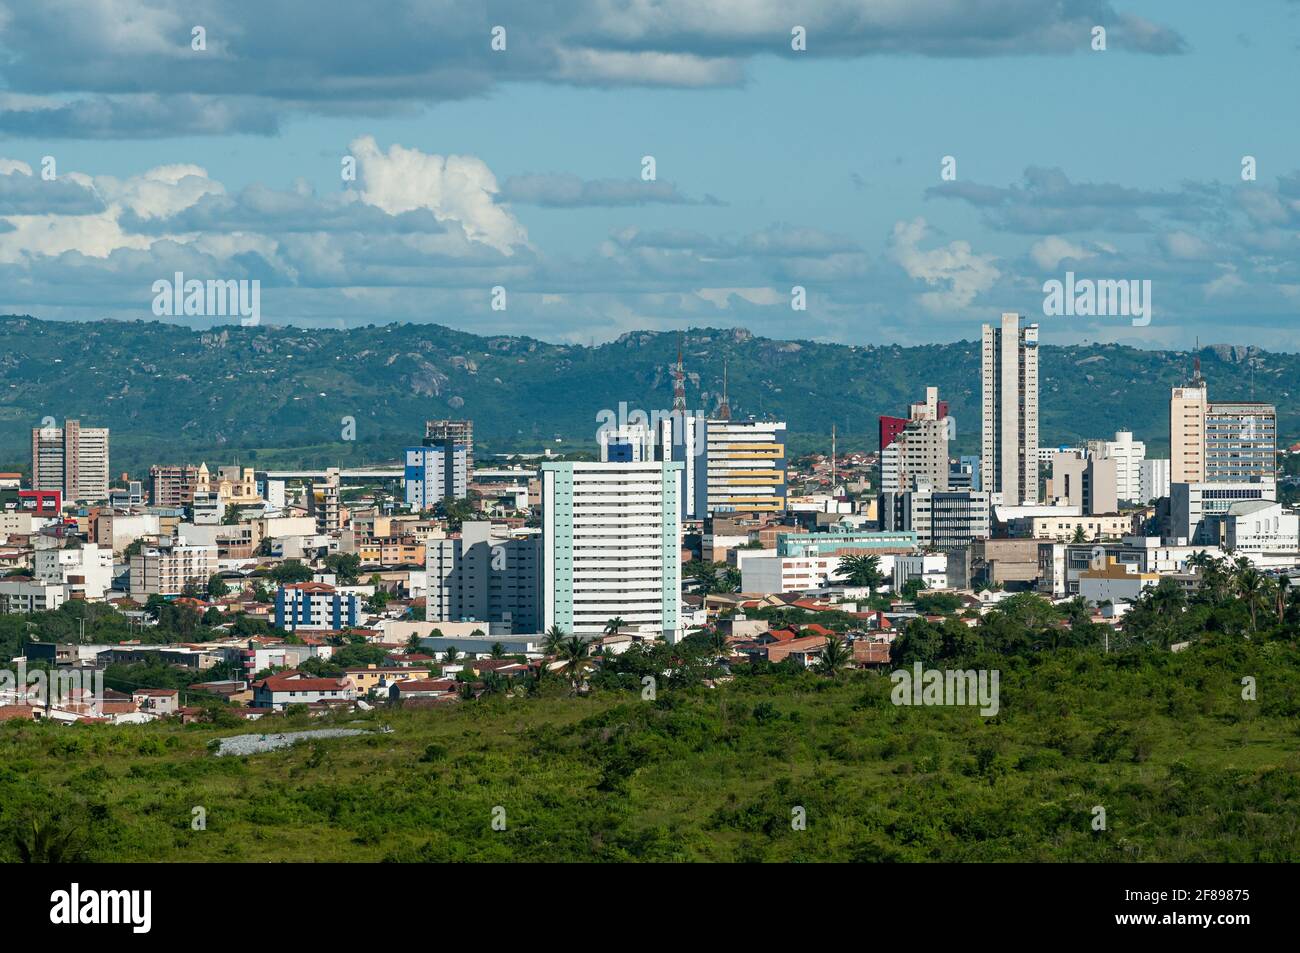 Campina Grande, Paraiba, Brazil on June 16, 2008. Partial view of the city, showing buildings and rural area. Stock Photo